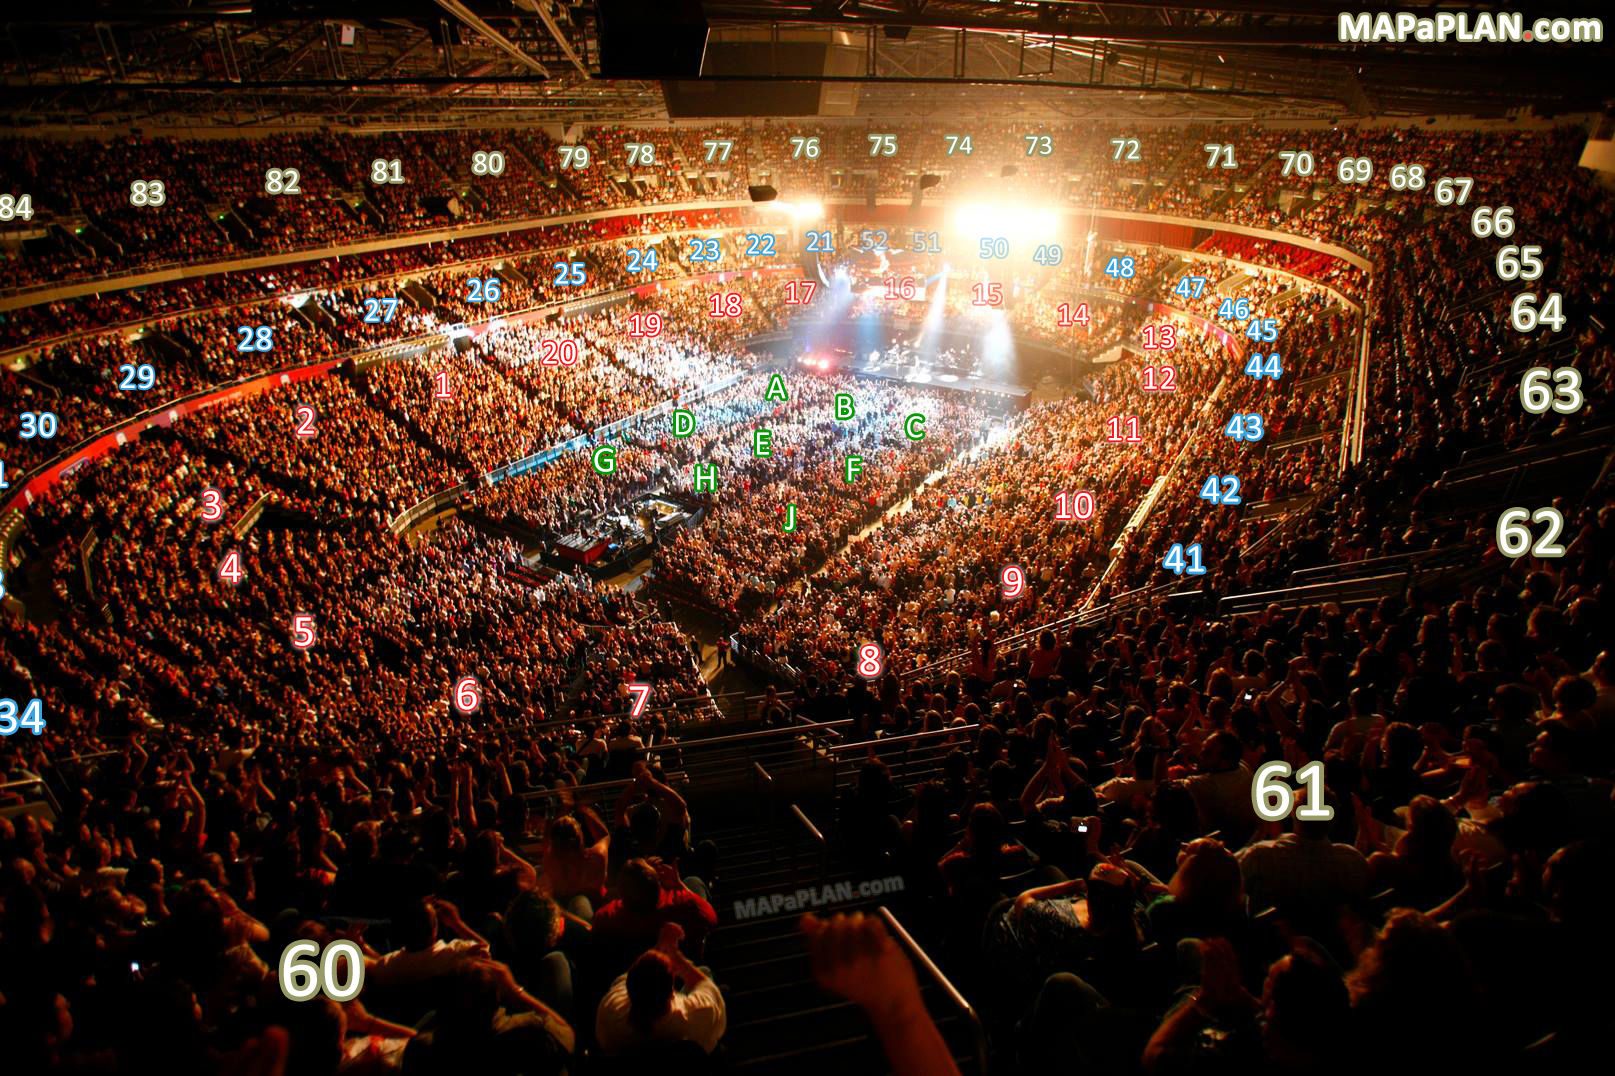 View from Section 60 Row K Seat 188 Virtual interactive inside best seats 3d tour Sydney Qudos Bank Arena seating chart